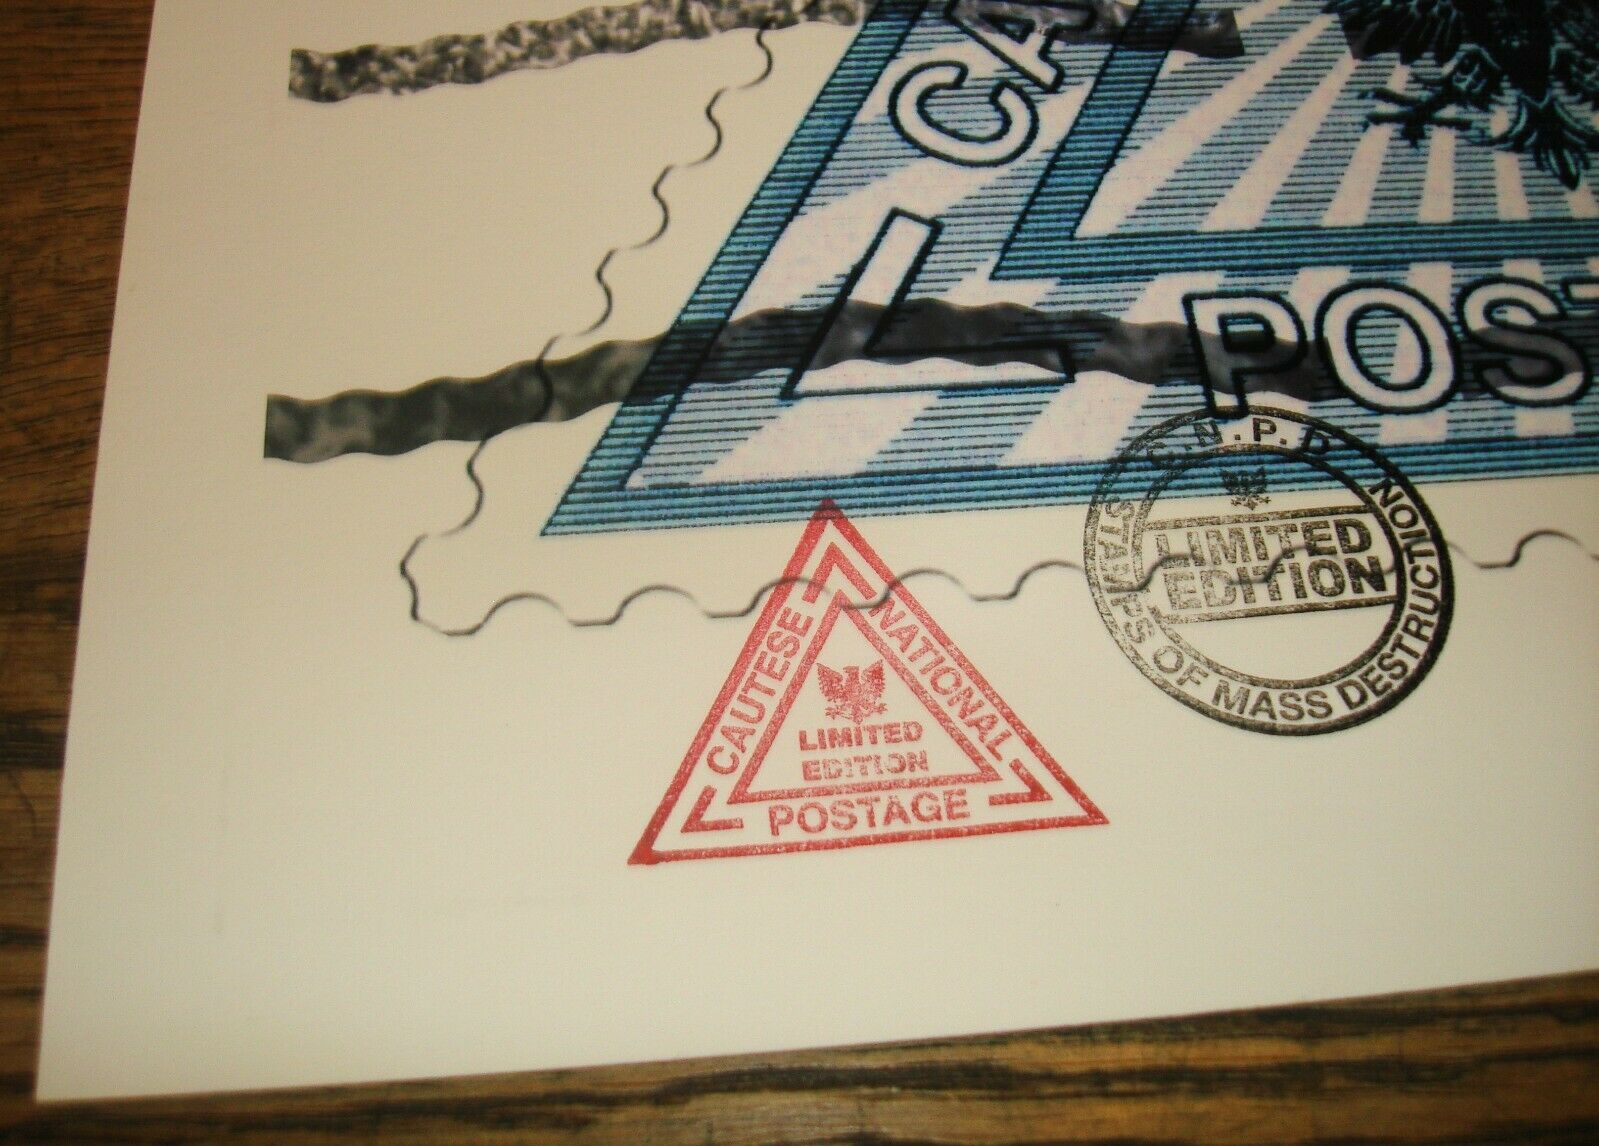 James Cauty (1956 - ) CNPD £2, £3 and £4 Triangle Stamps - Set of 3 Pop Editions COA (2005) - Image 4 of 13